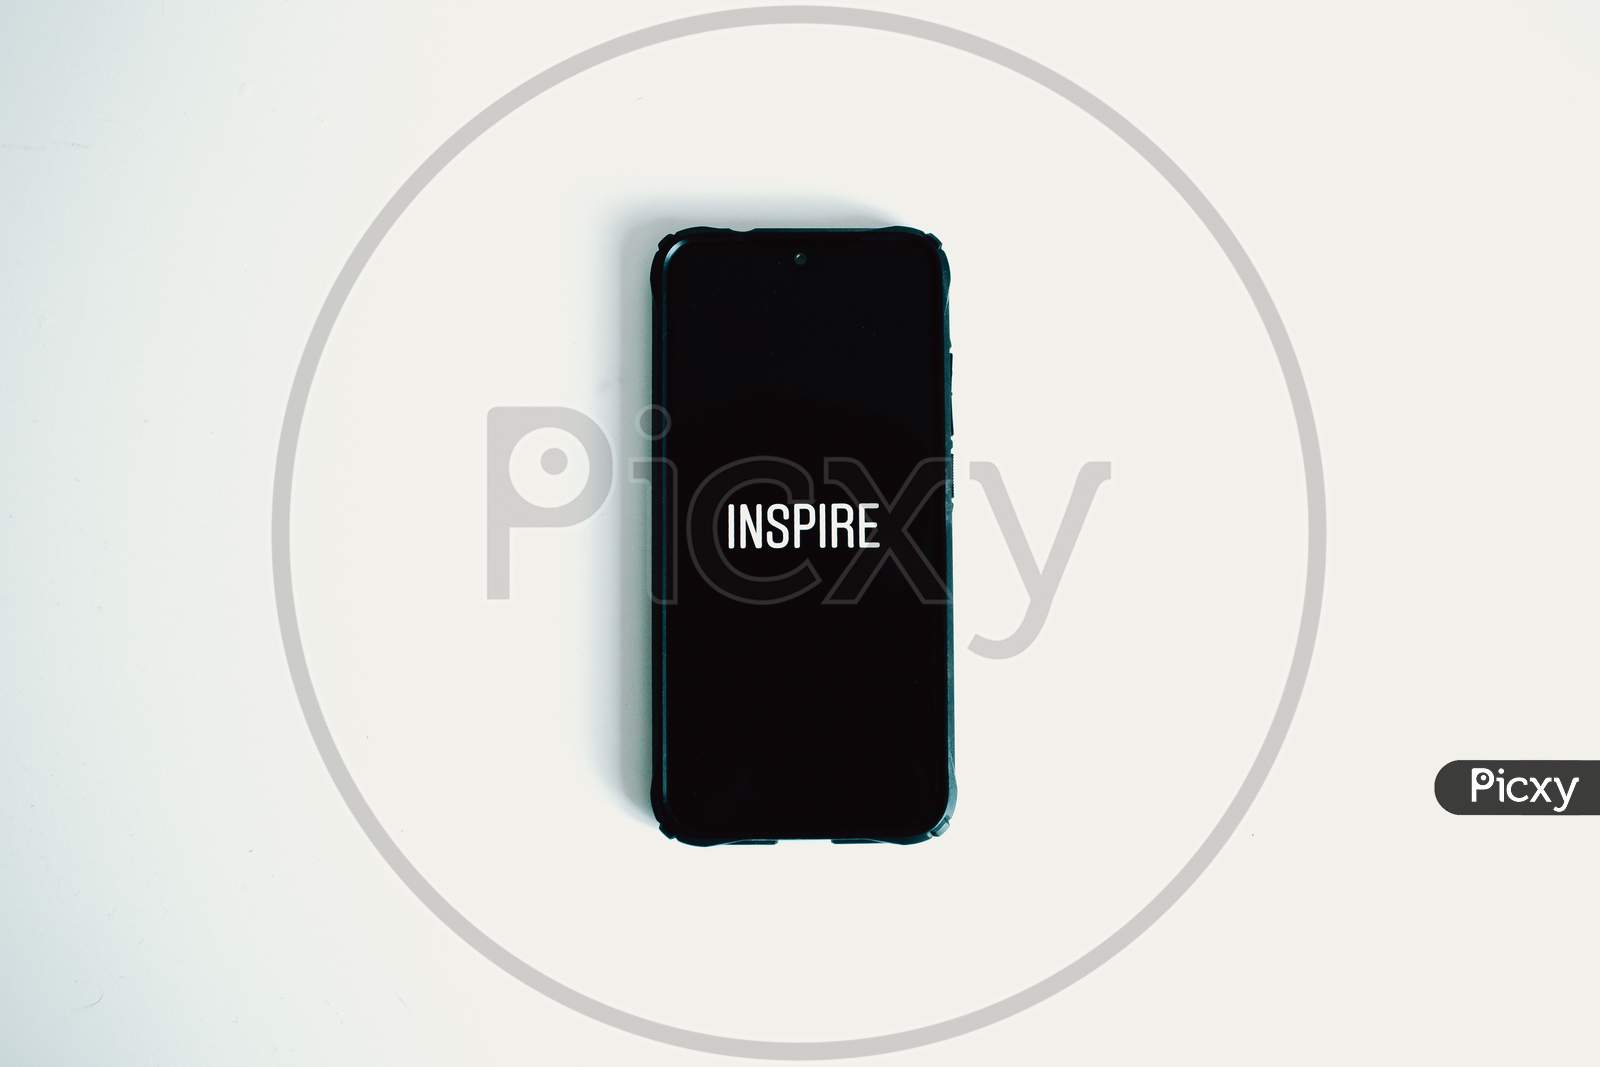 Flat Lay Of A Black Phone Over A White Background With The Word Inspire Written In It